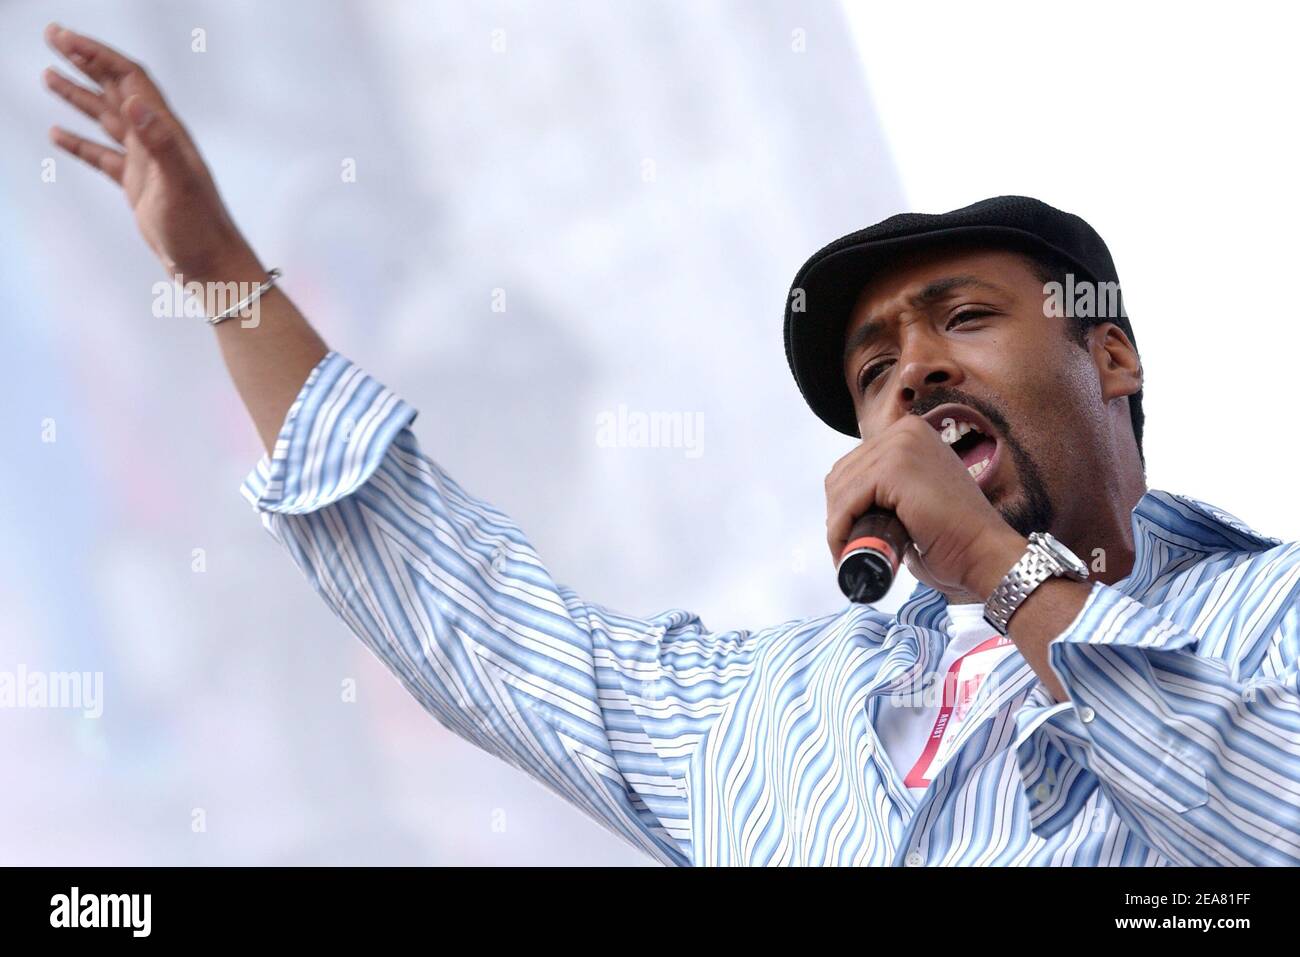 Jesse L. Martin performs live at the 7th annual Revlon Run / Walk for Women on Times Square, New York, on Saturday, May 1, 2004. (Pictured : Jesse L. Martin). Photo by Nicolas Khayat/ABACA. Stock Photo